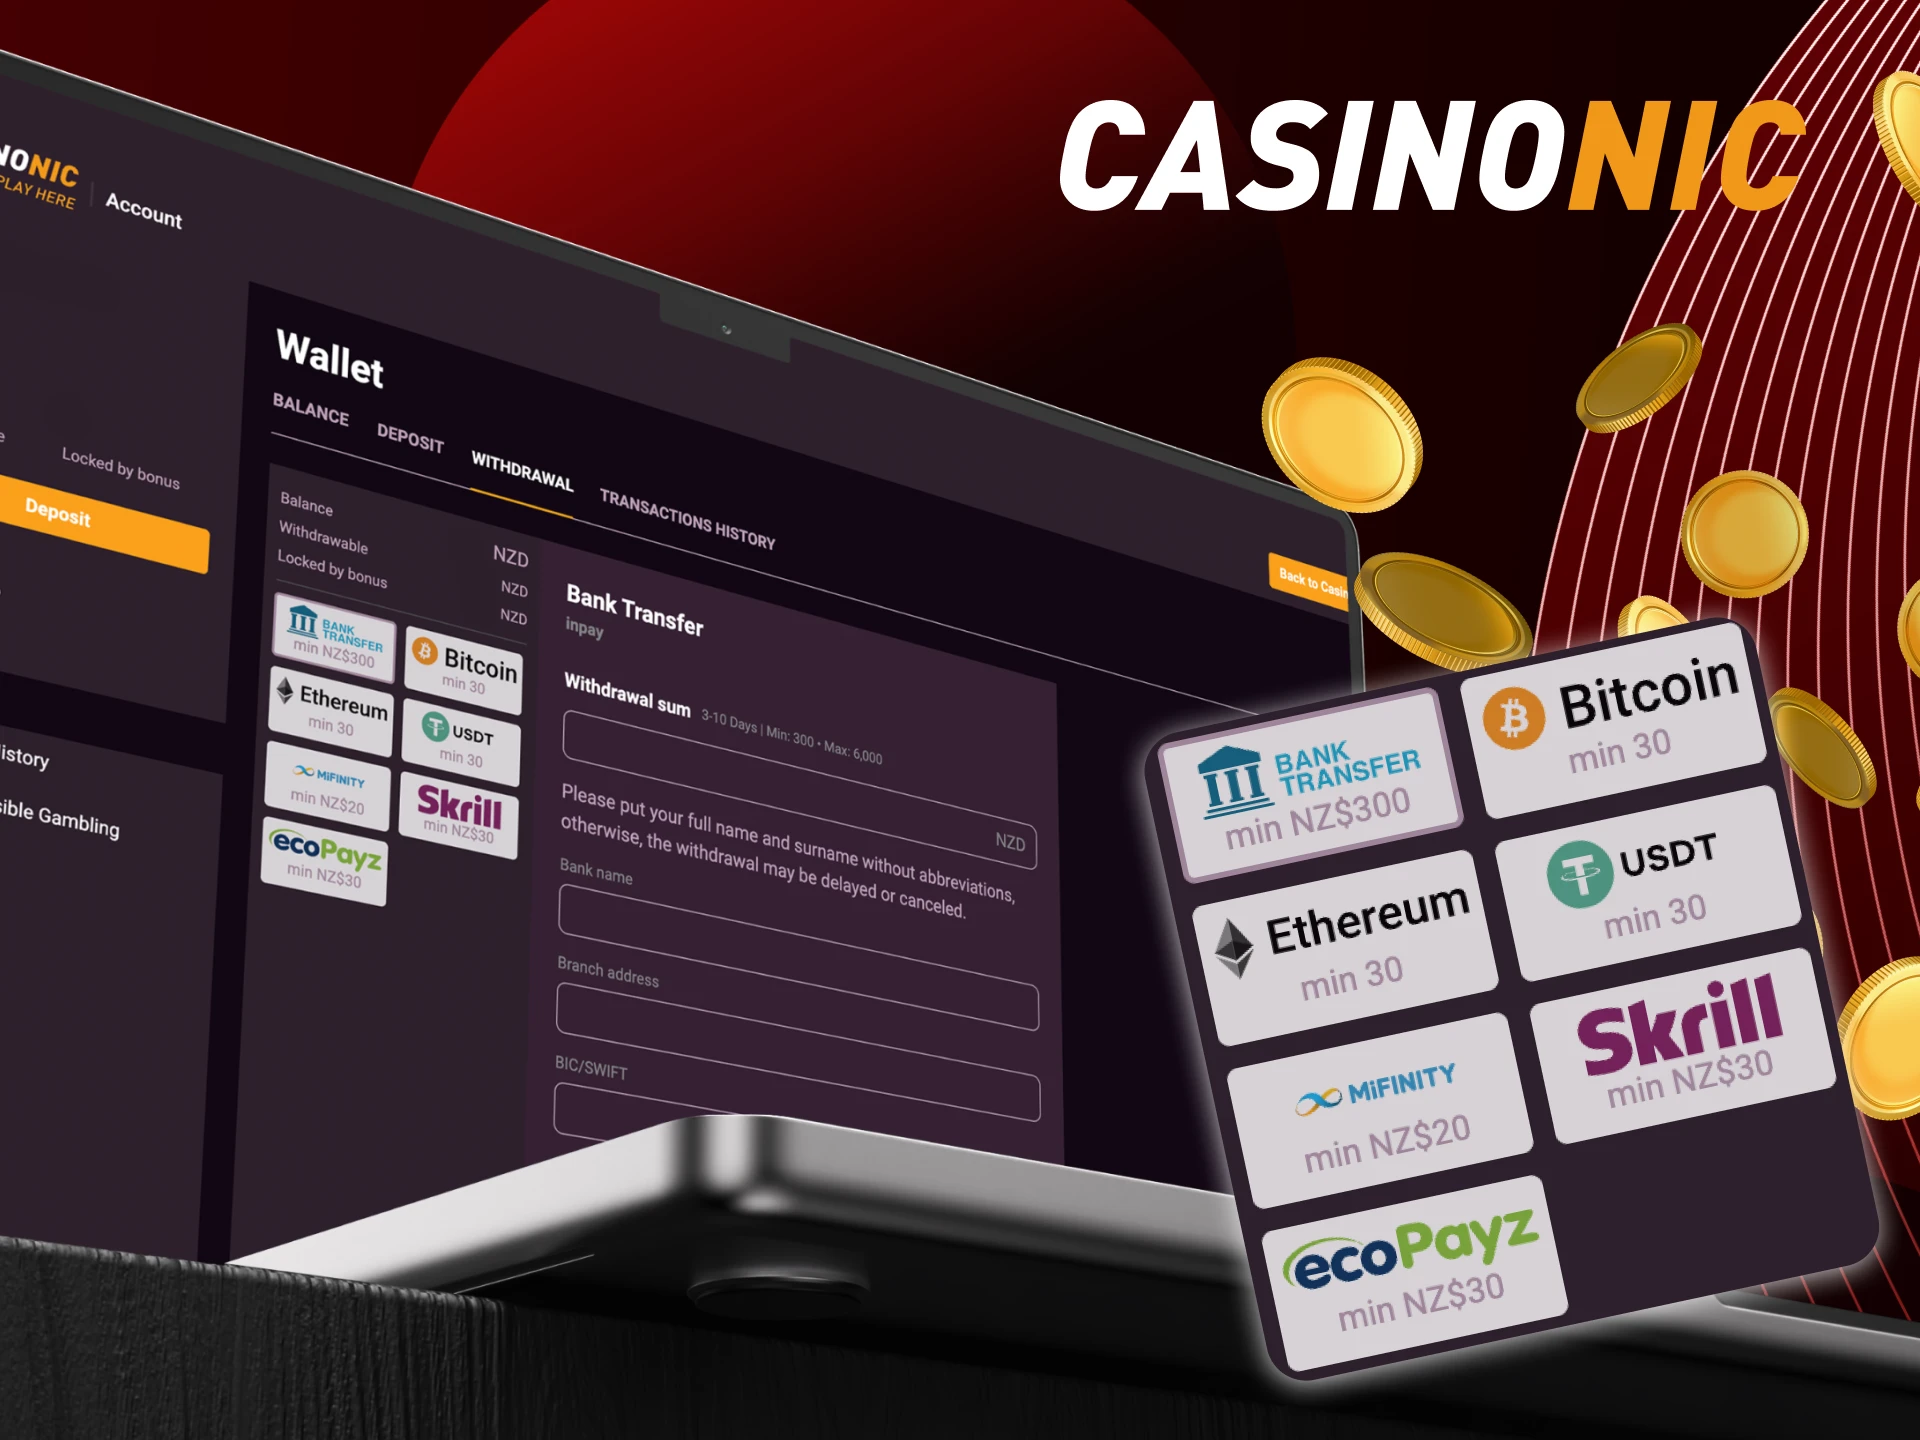 What do I need to do to withdraw money from my account at the online casino CasinoNic.